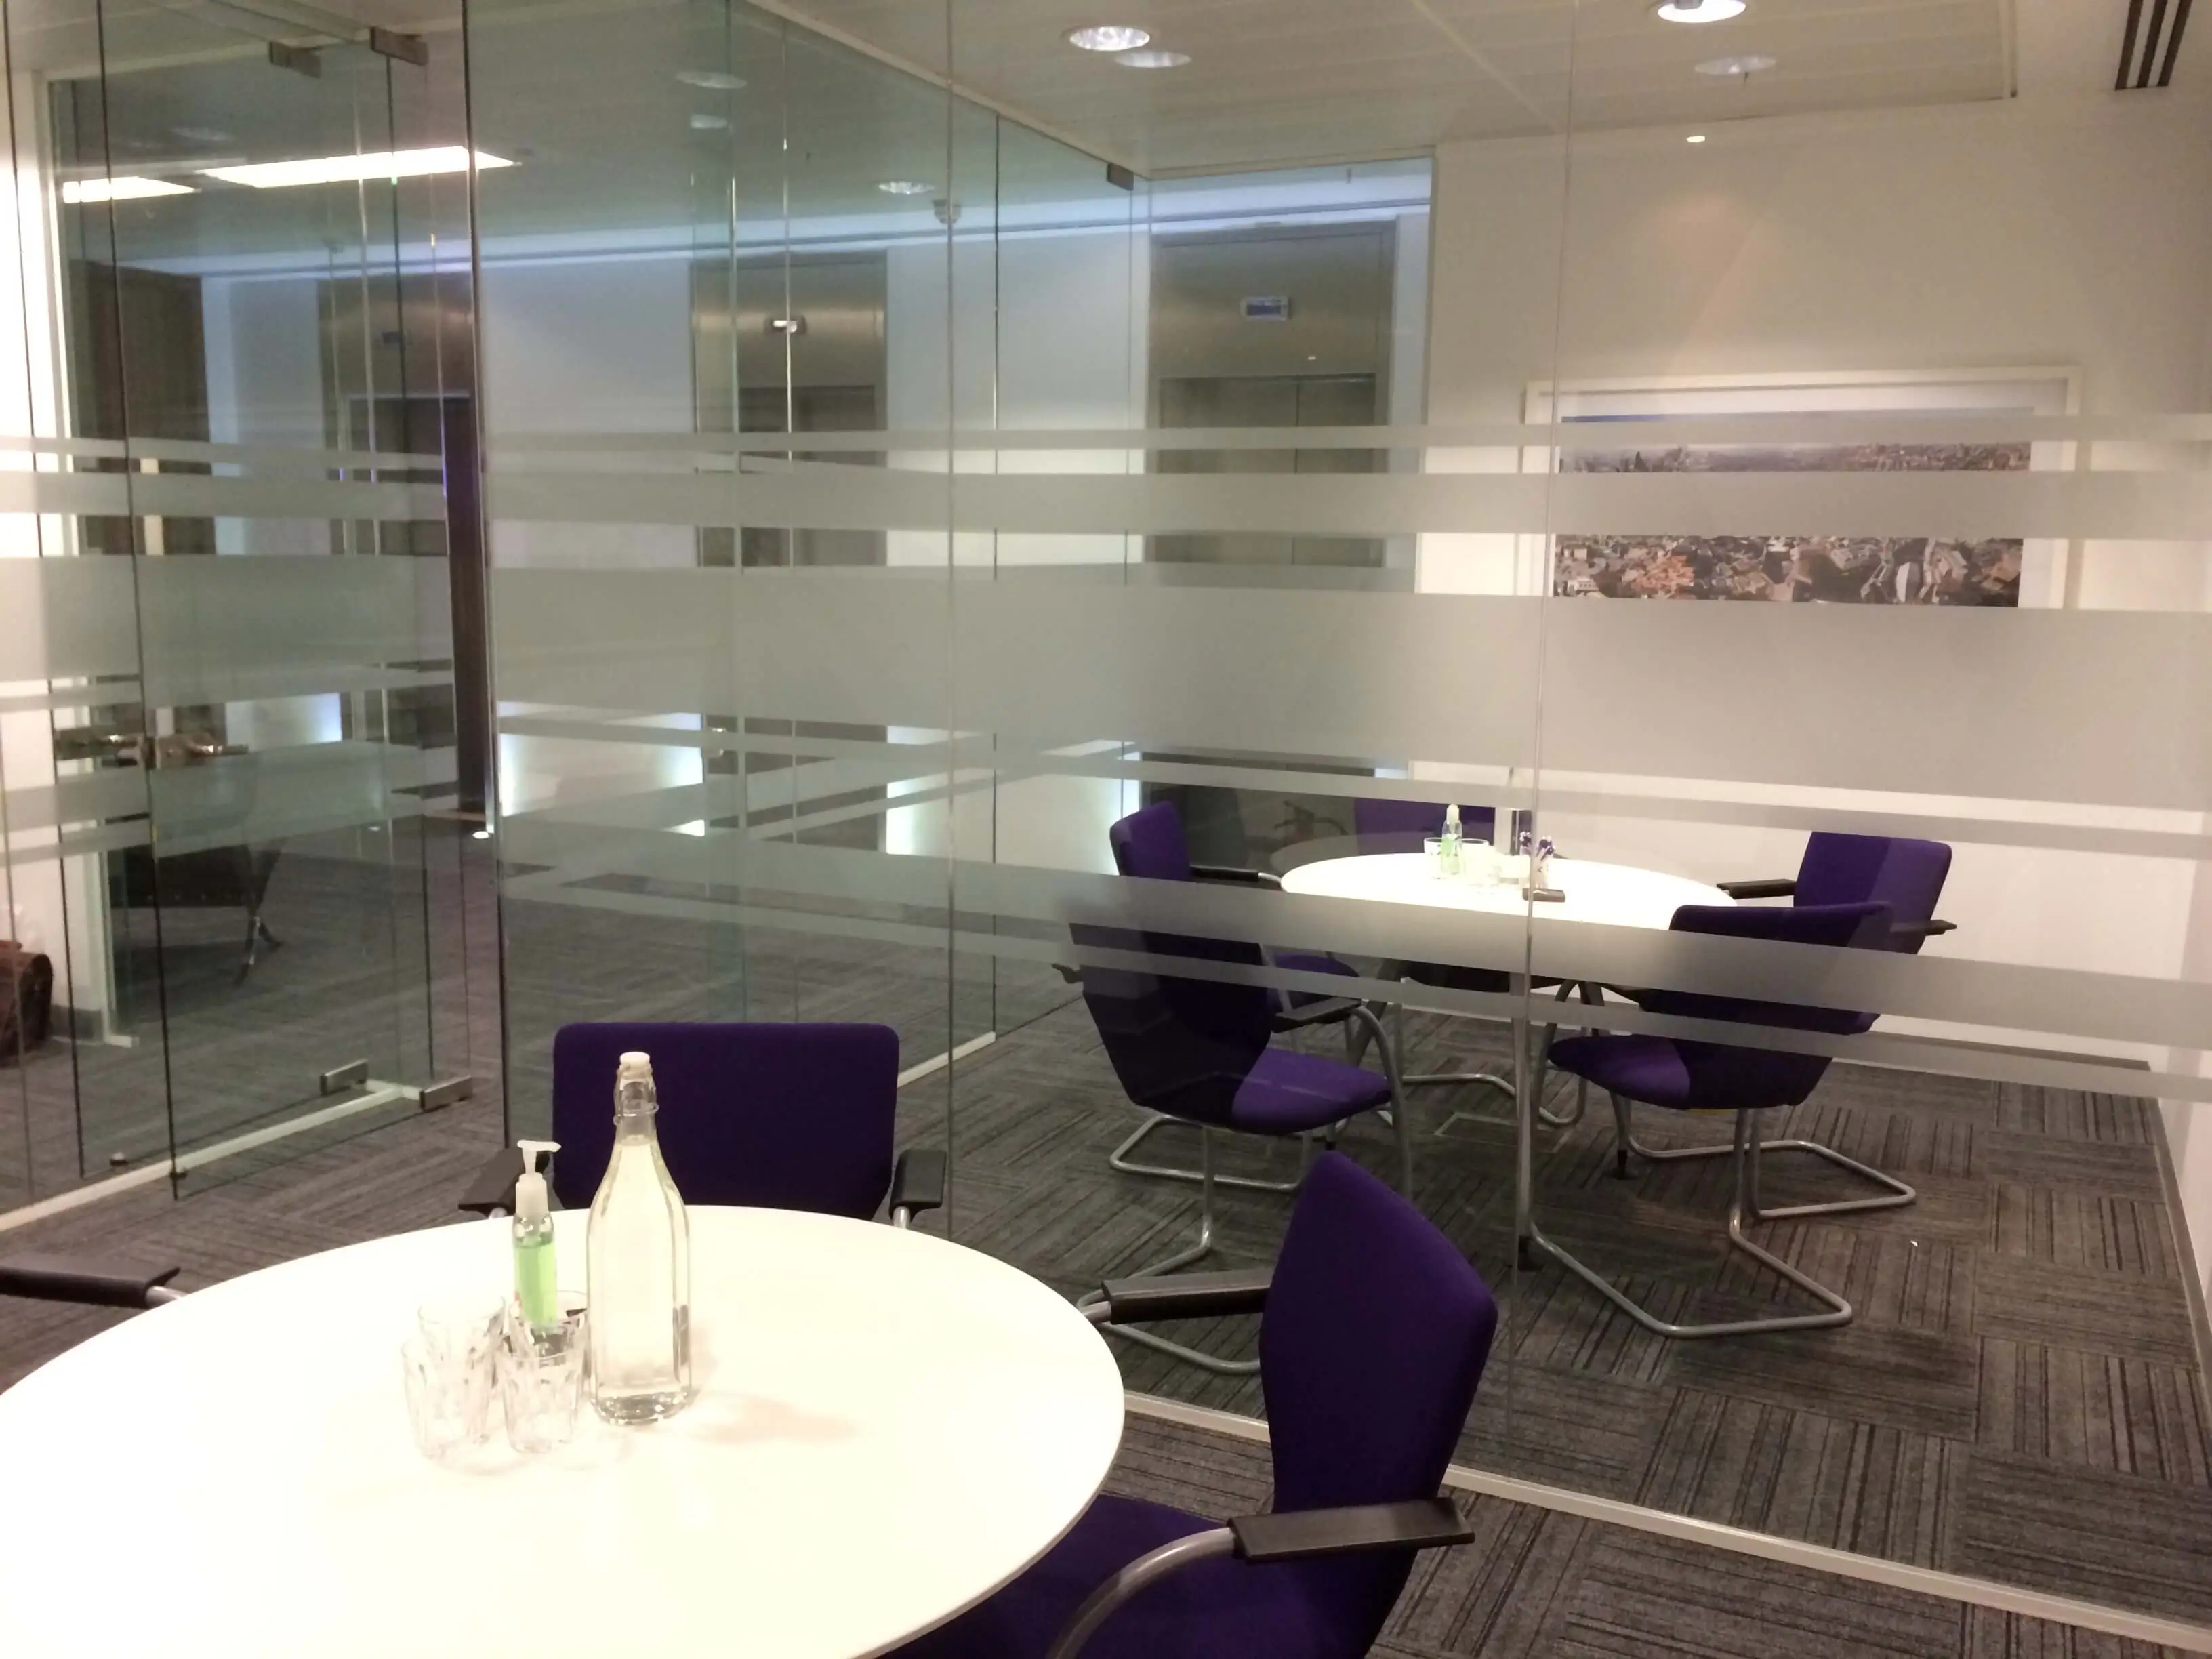 Two small meeting rooms are separated with glass walls